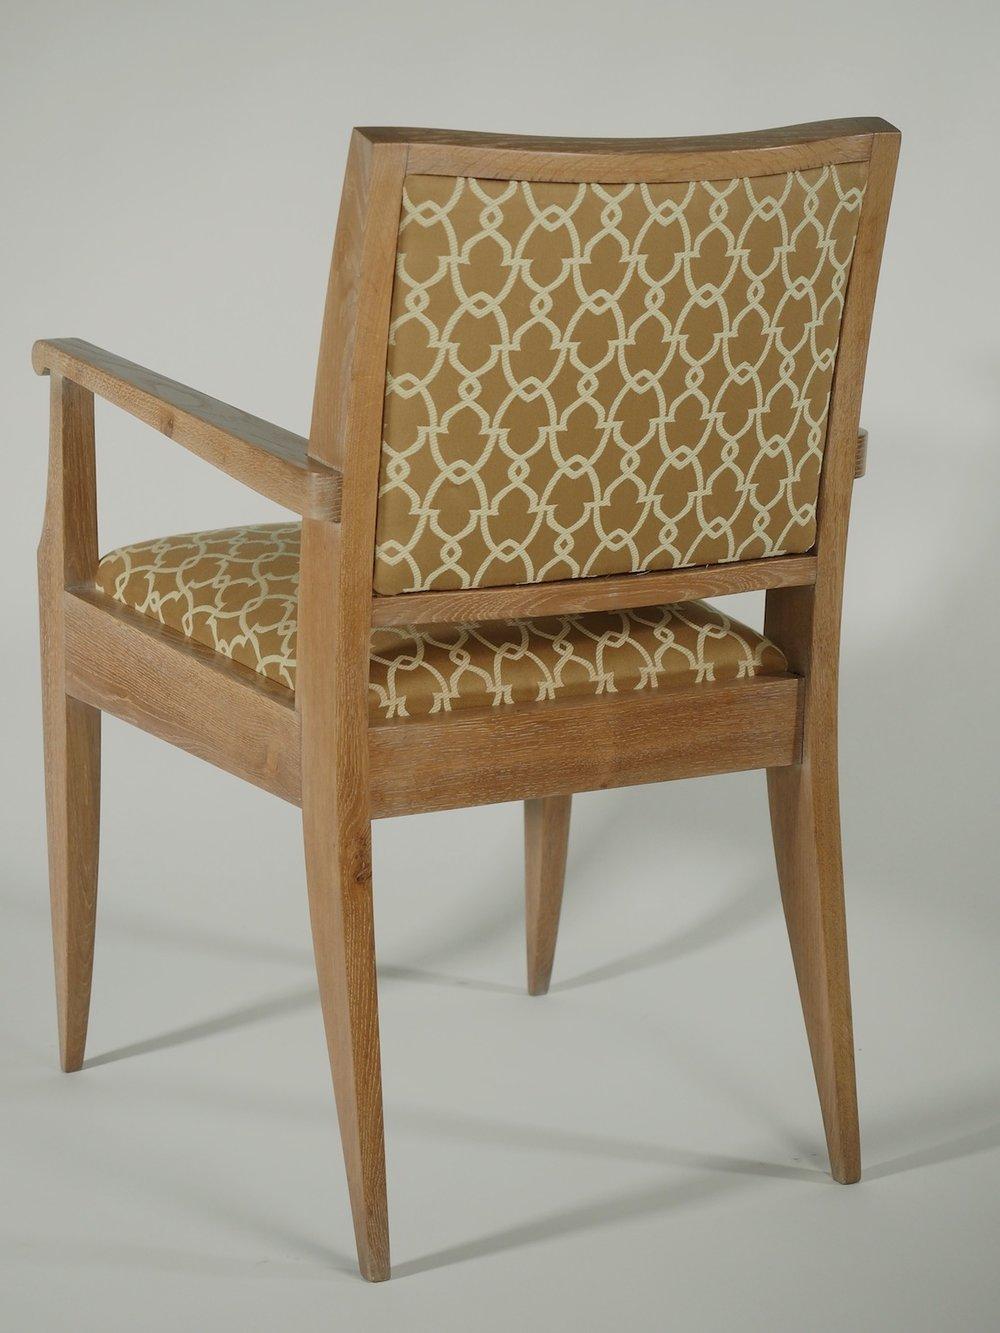 Dominique Pair of Oak Armchairs In Excellent Condition For Sale In Philadelphia, PA